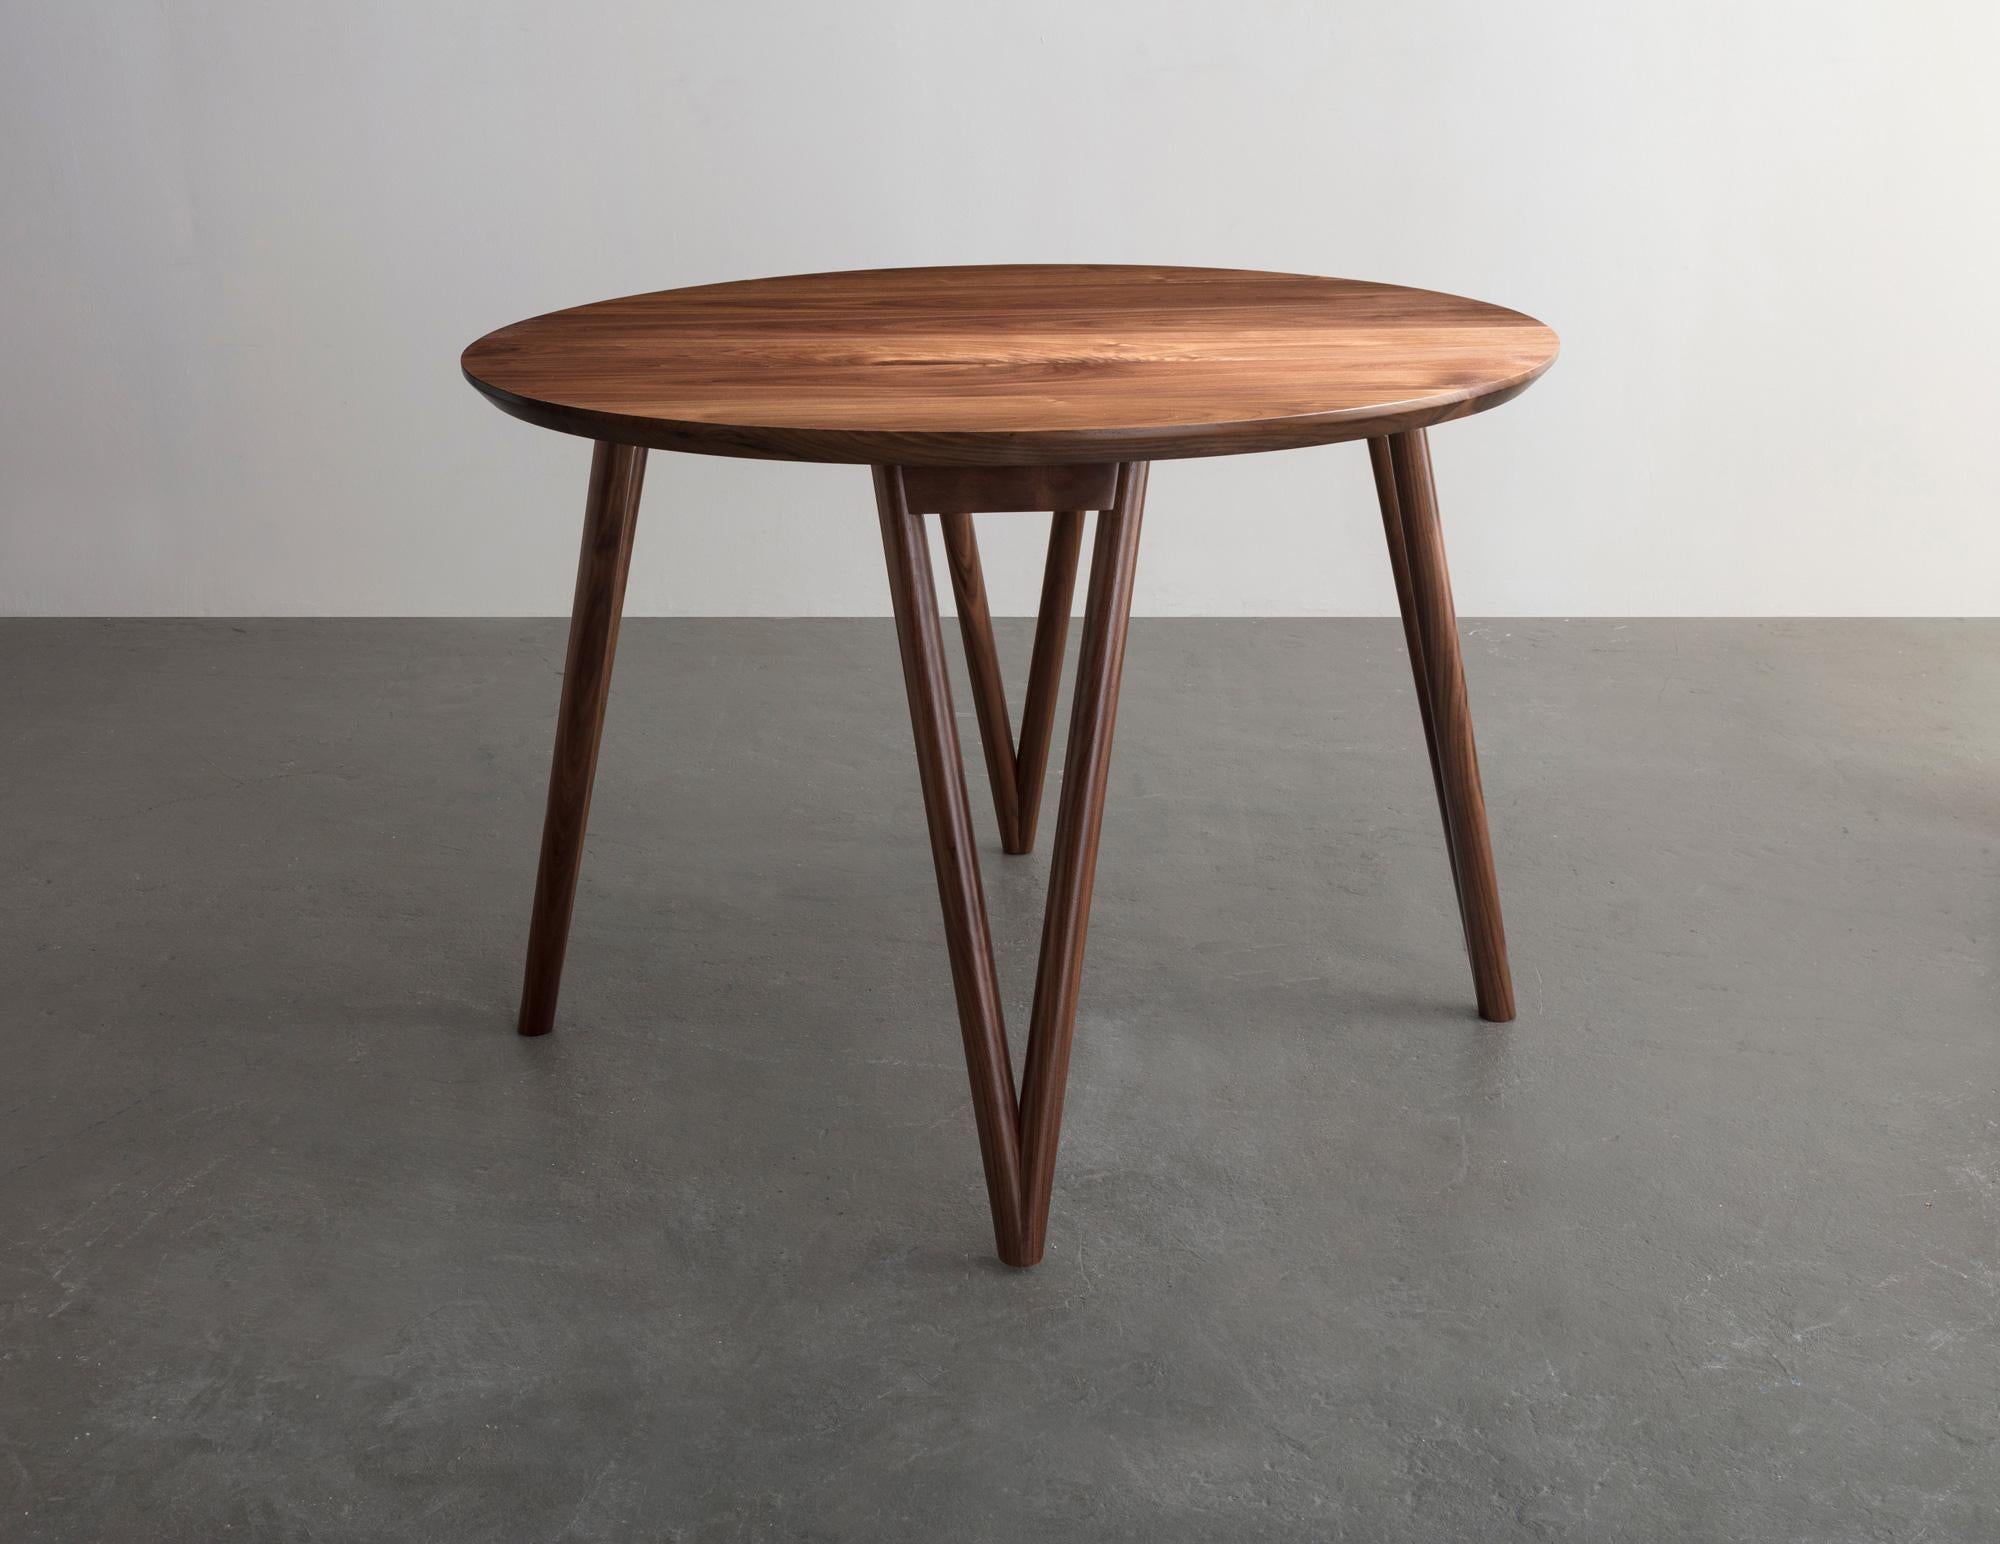 The Hair Pin table uses a solid wood interpretation of a classic leg giving new style to this seemingly traditional support.

Shown in walnut and available in ash, maple, or white oak. 

